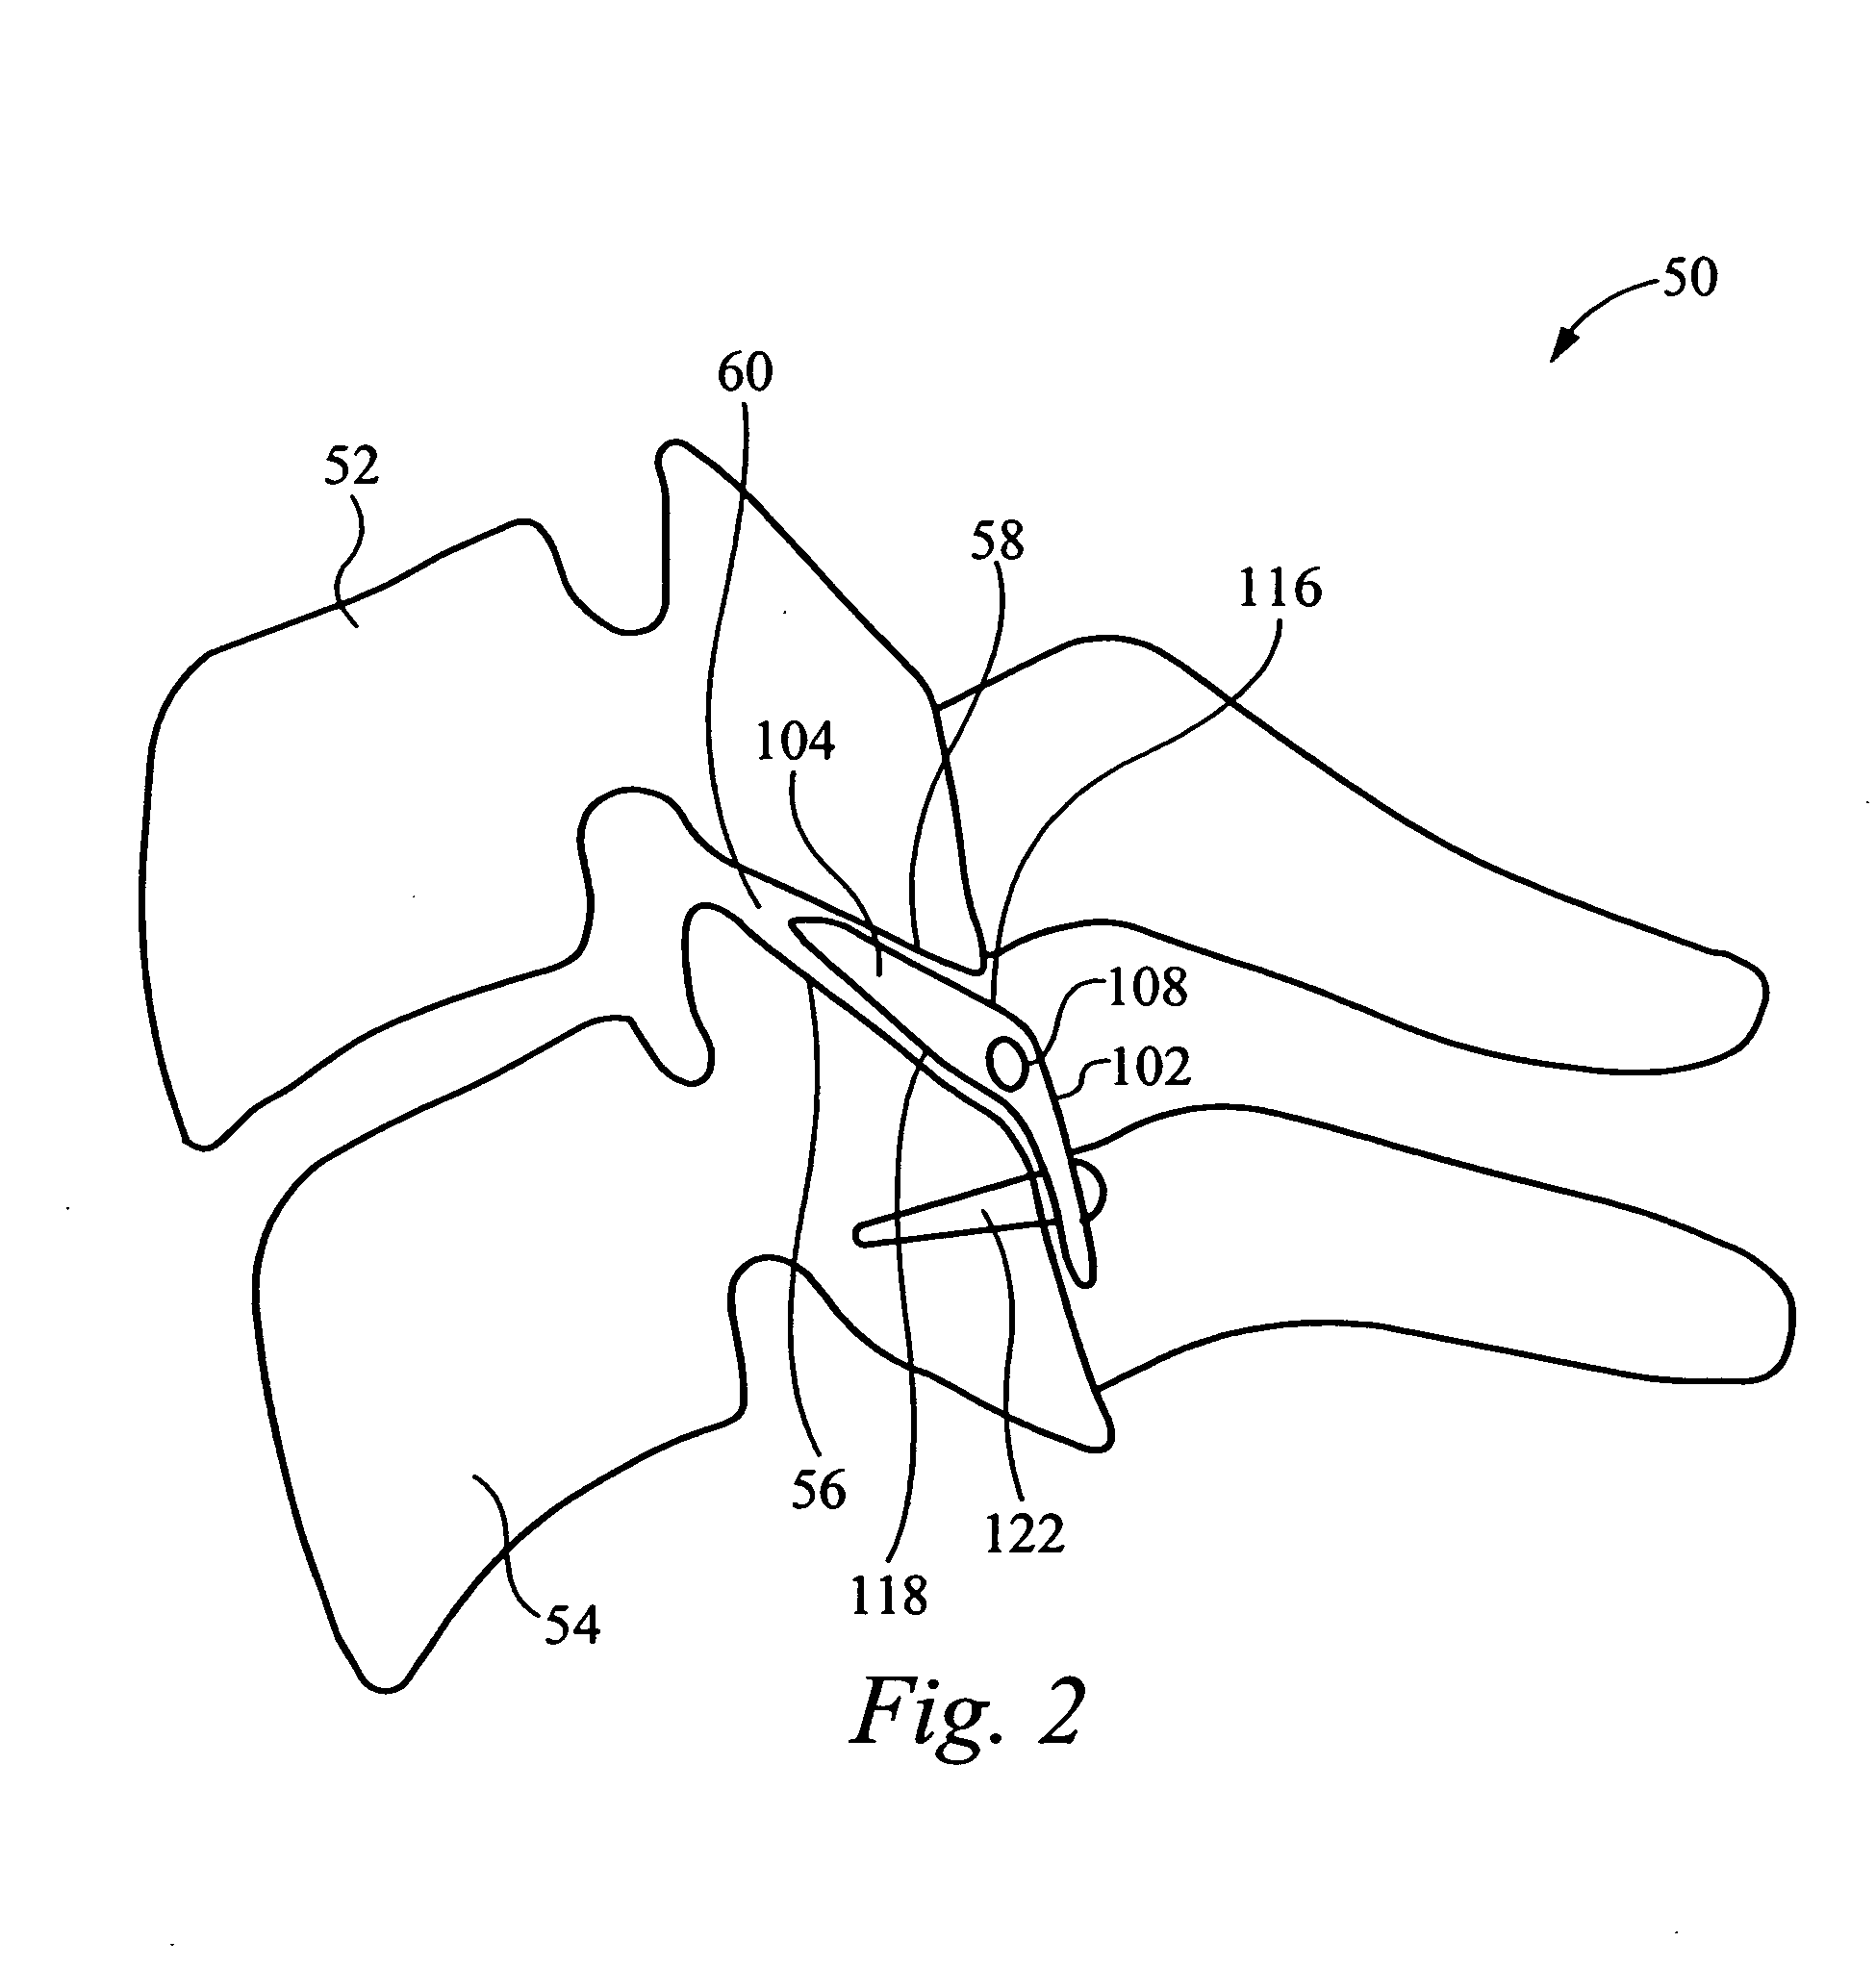 Inter-cervical facet implant distraction tool